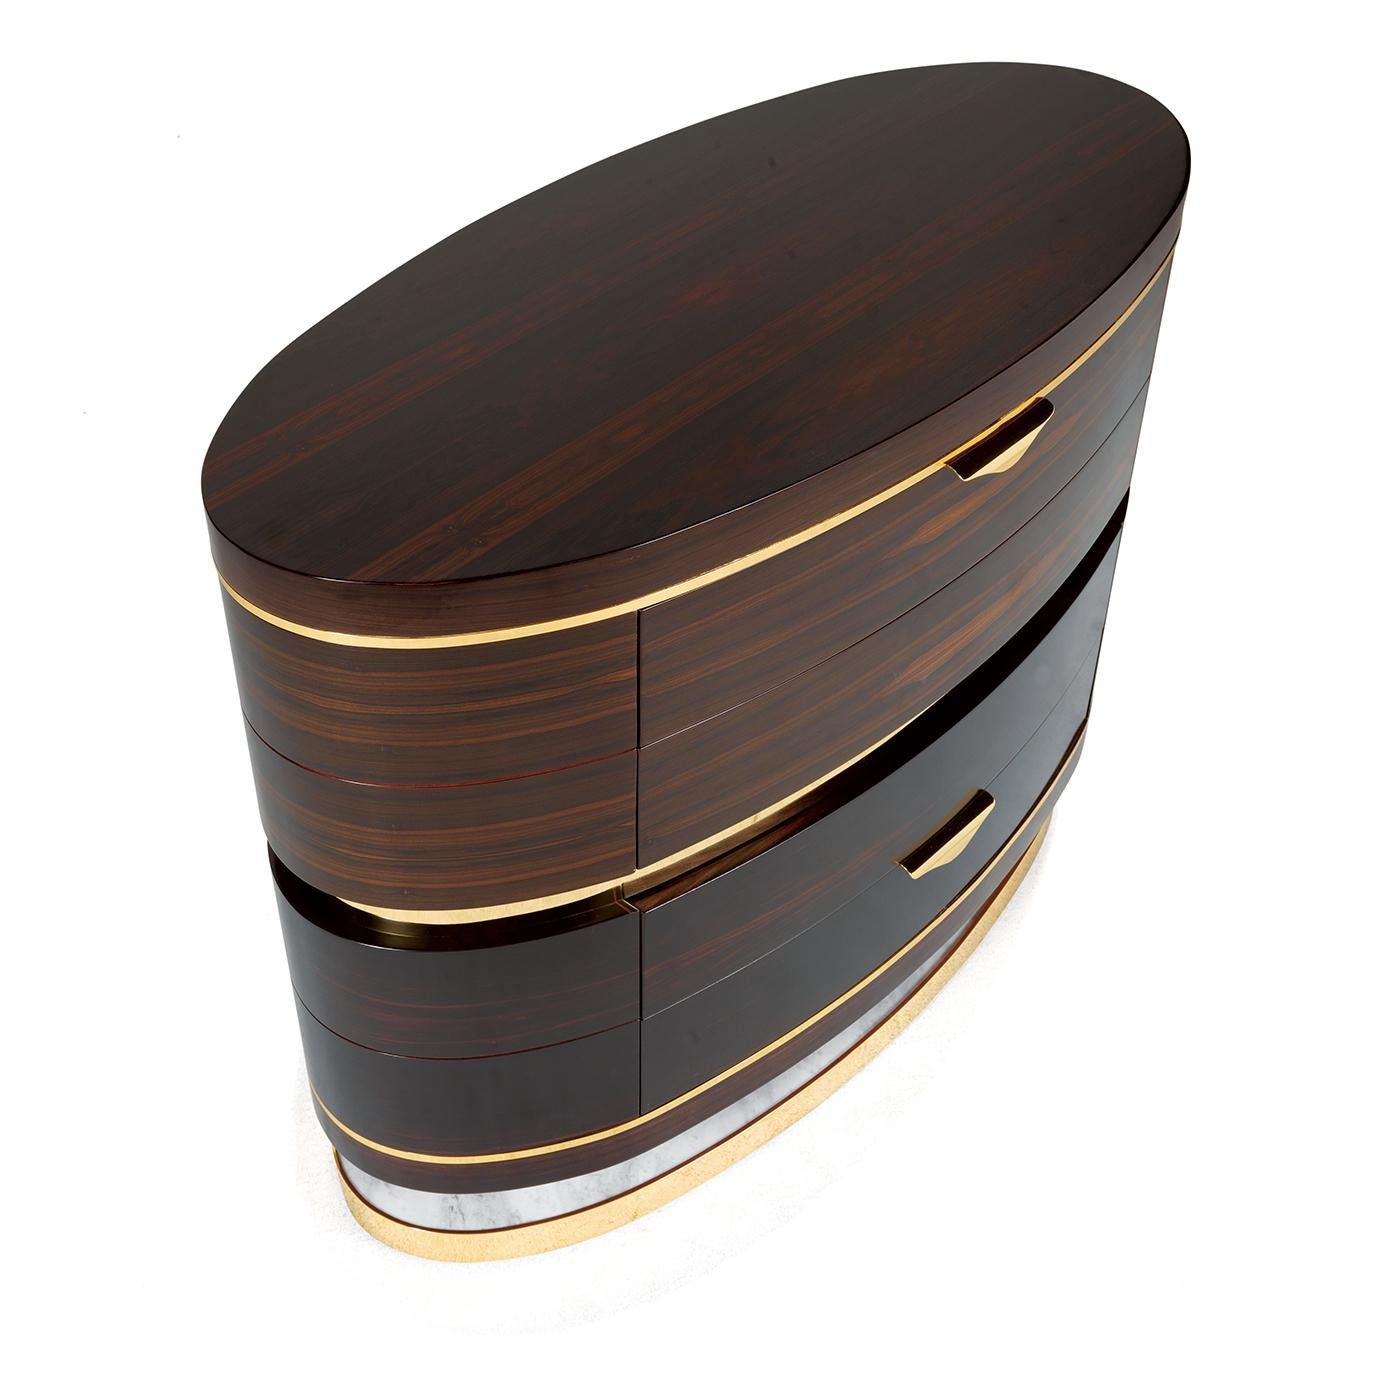 Combining the dark elegance of ebony with the strikingly large grain of the ziricote wood, this oval chest of drawers is a stunning piece of functional decor that will enrich the look of any bedroom. The bold structure rests on a base in brass,